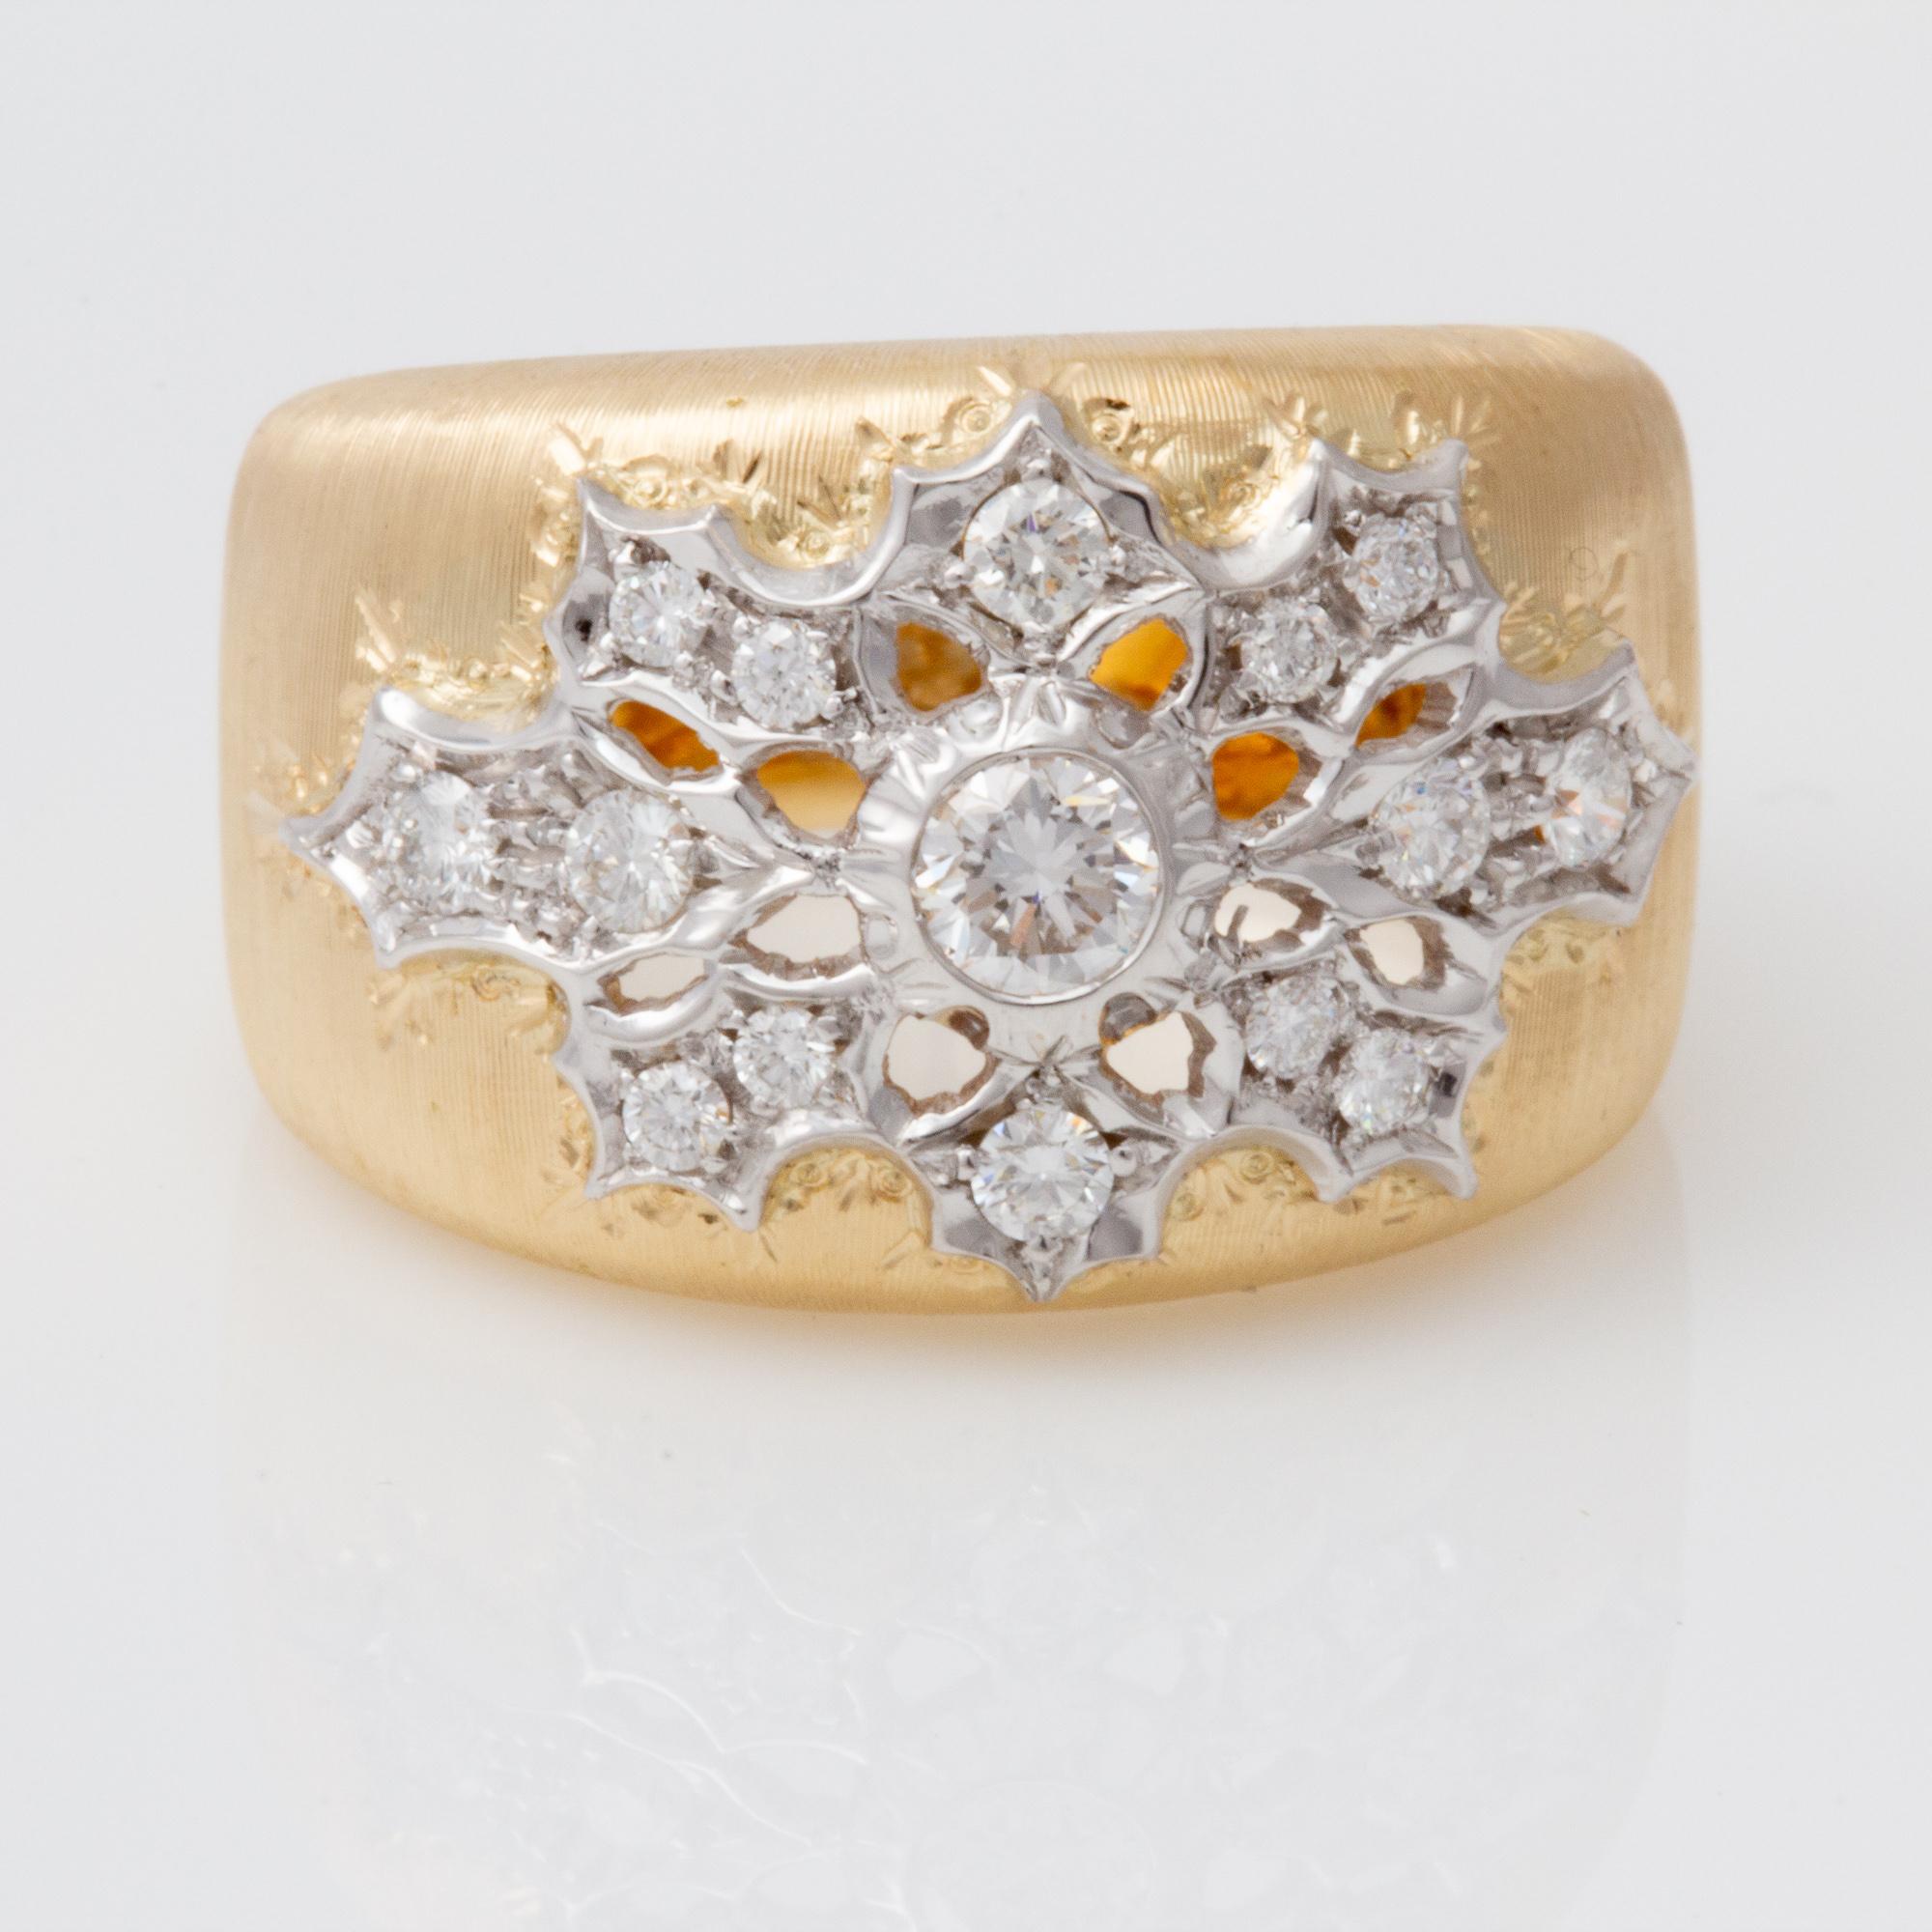 Handcrafted in Italy in an old world Florentine style, this exquisite Diamond ring is set in two tone 18 kt Gold and is truly amazing. 
Created in  a small family run studio in Florence, Italy this artisan style has been produced for nearly 600